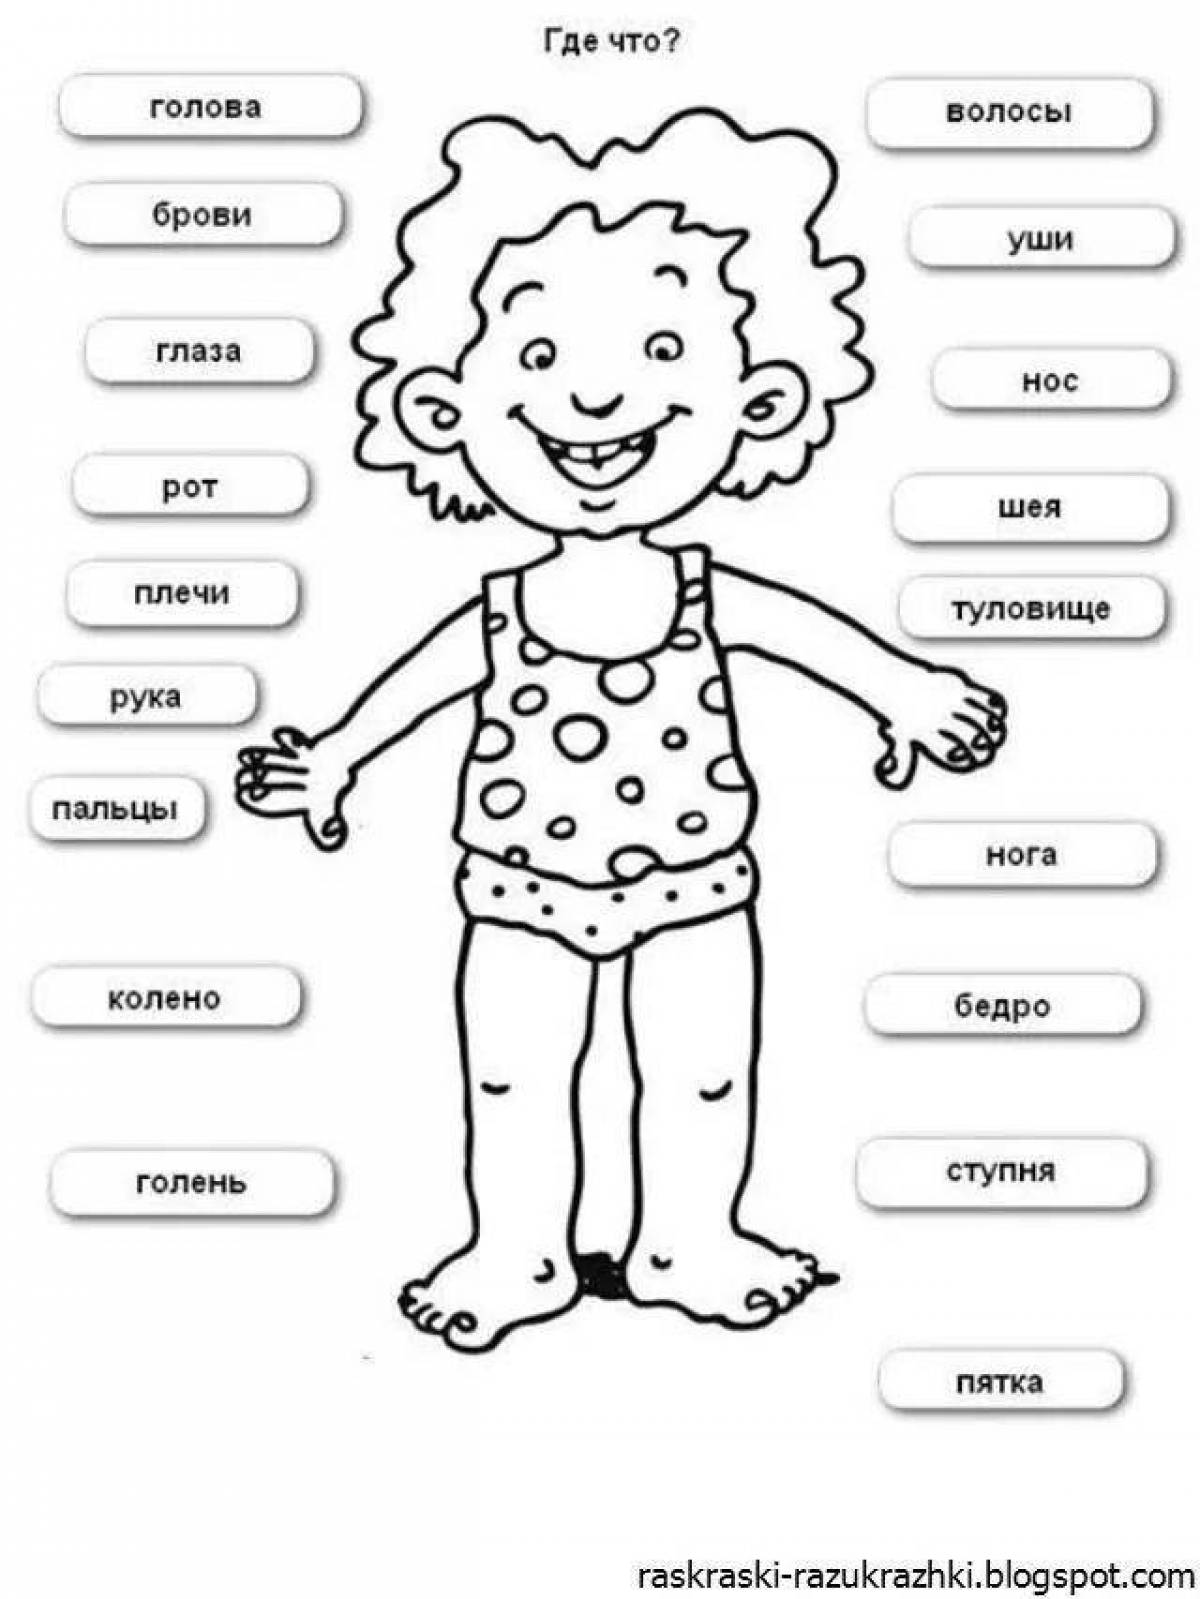 Human body parts for kids #2